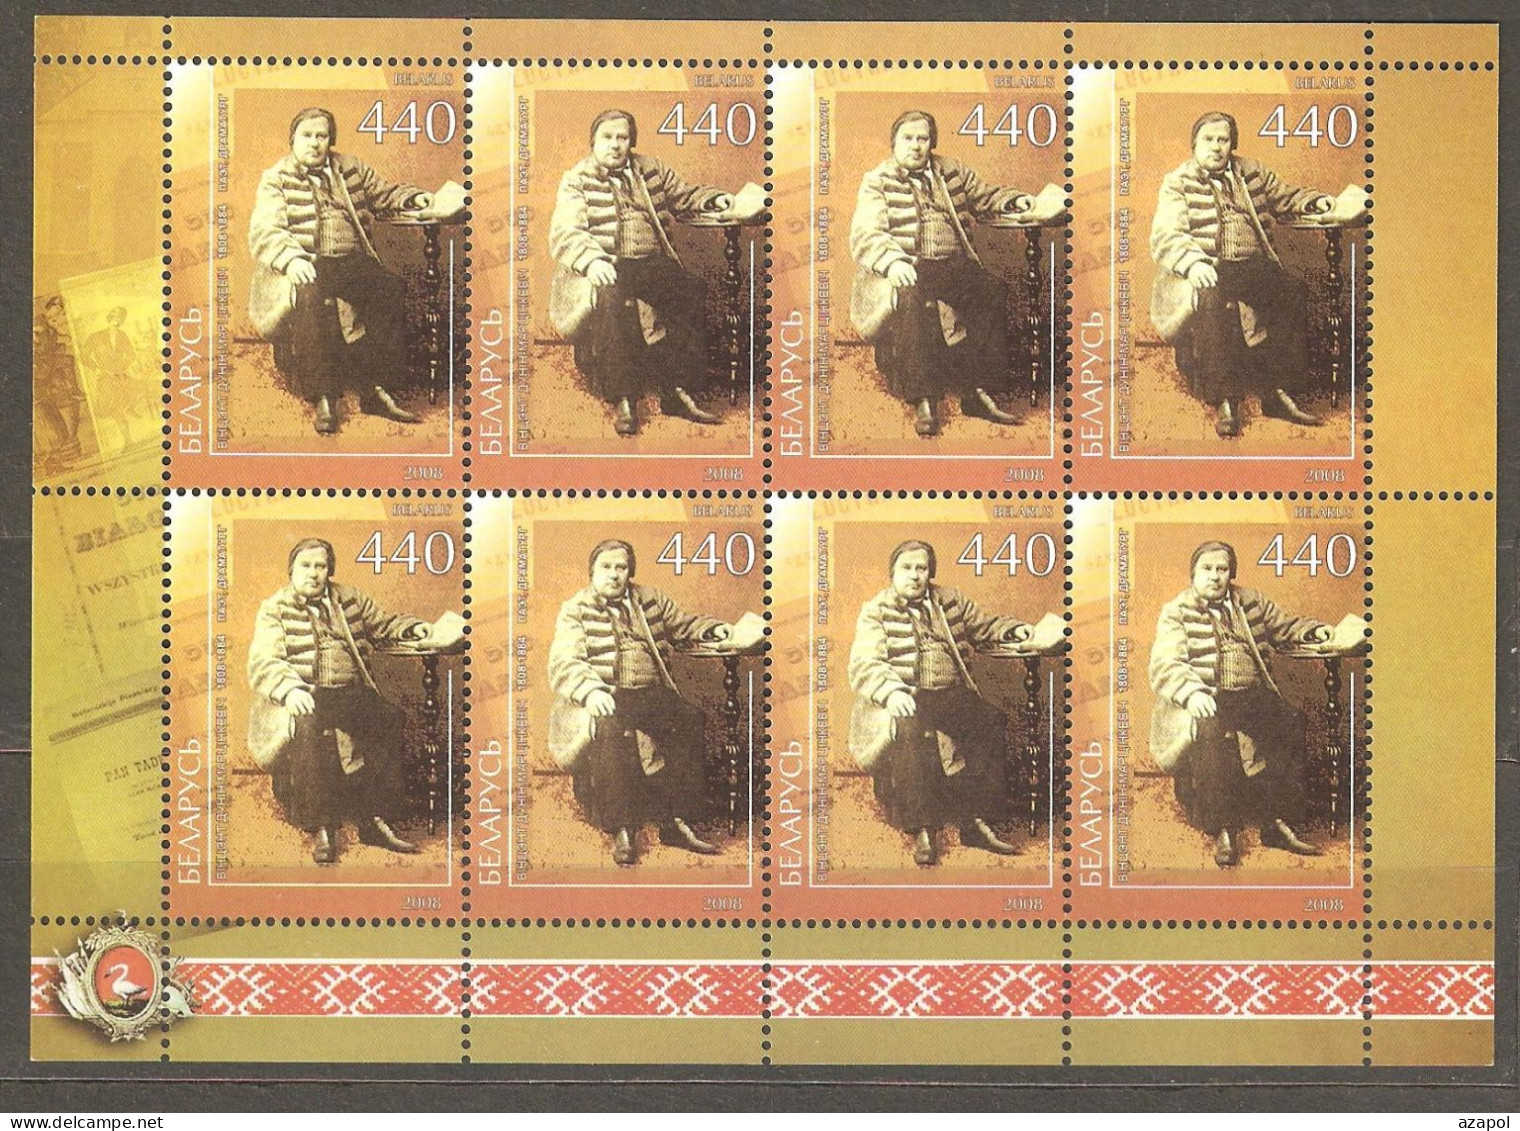 Belarus: 1 Mint Sheetlet, 200th Anniversary Of The Birth Of Poet Vincent Dunin-Marcinkevich, 2008, Mi#701, MNH - Escritores